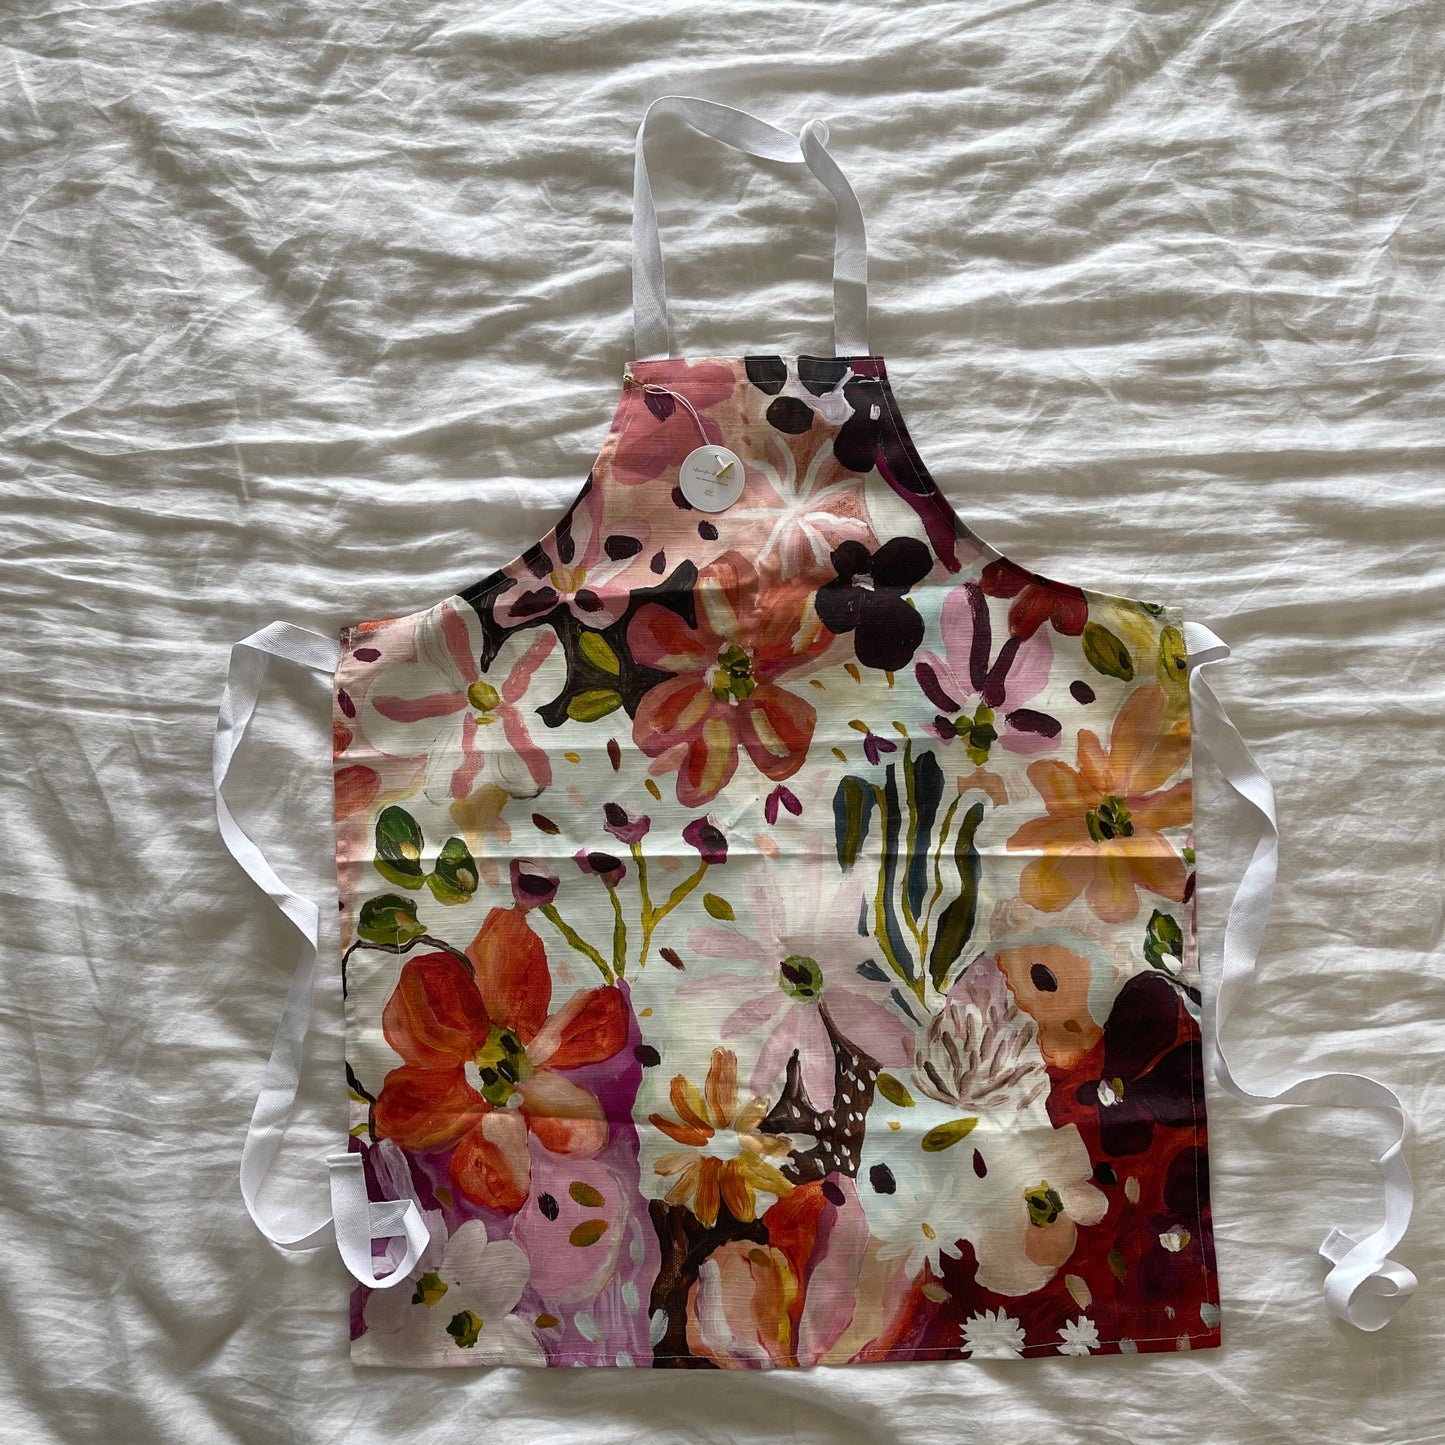 Apron in "Settle Petal" Print FREE NEXT DAY POSTAGE!